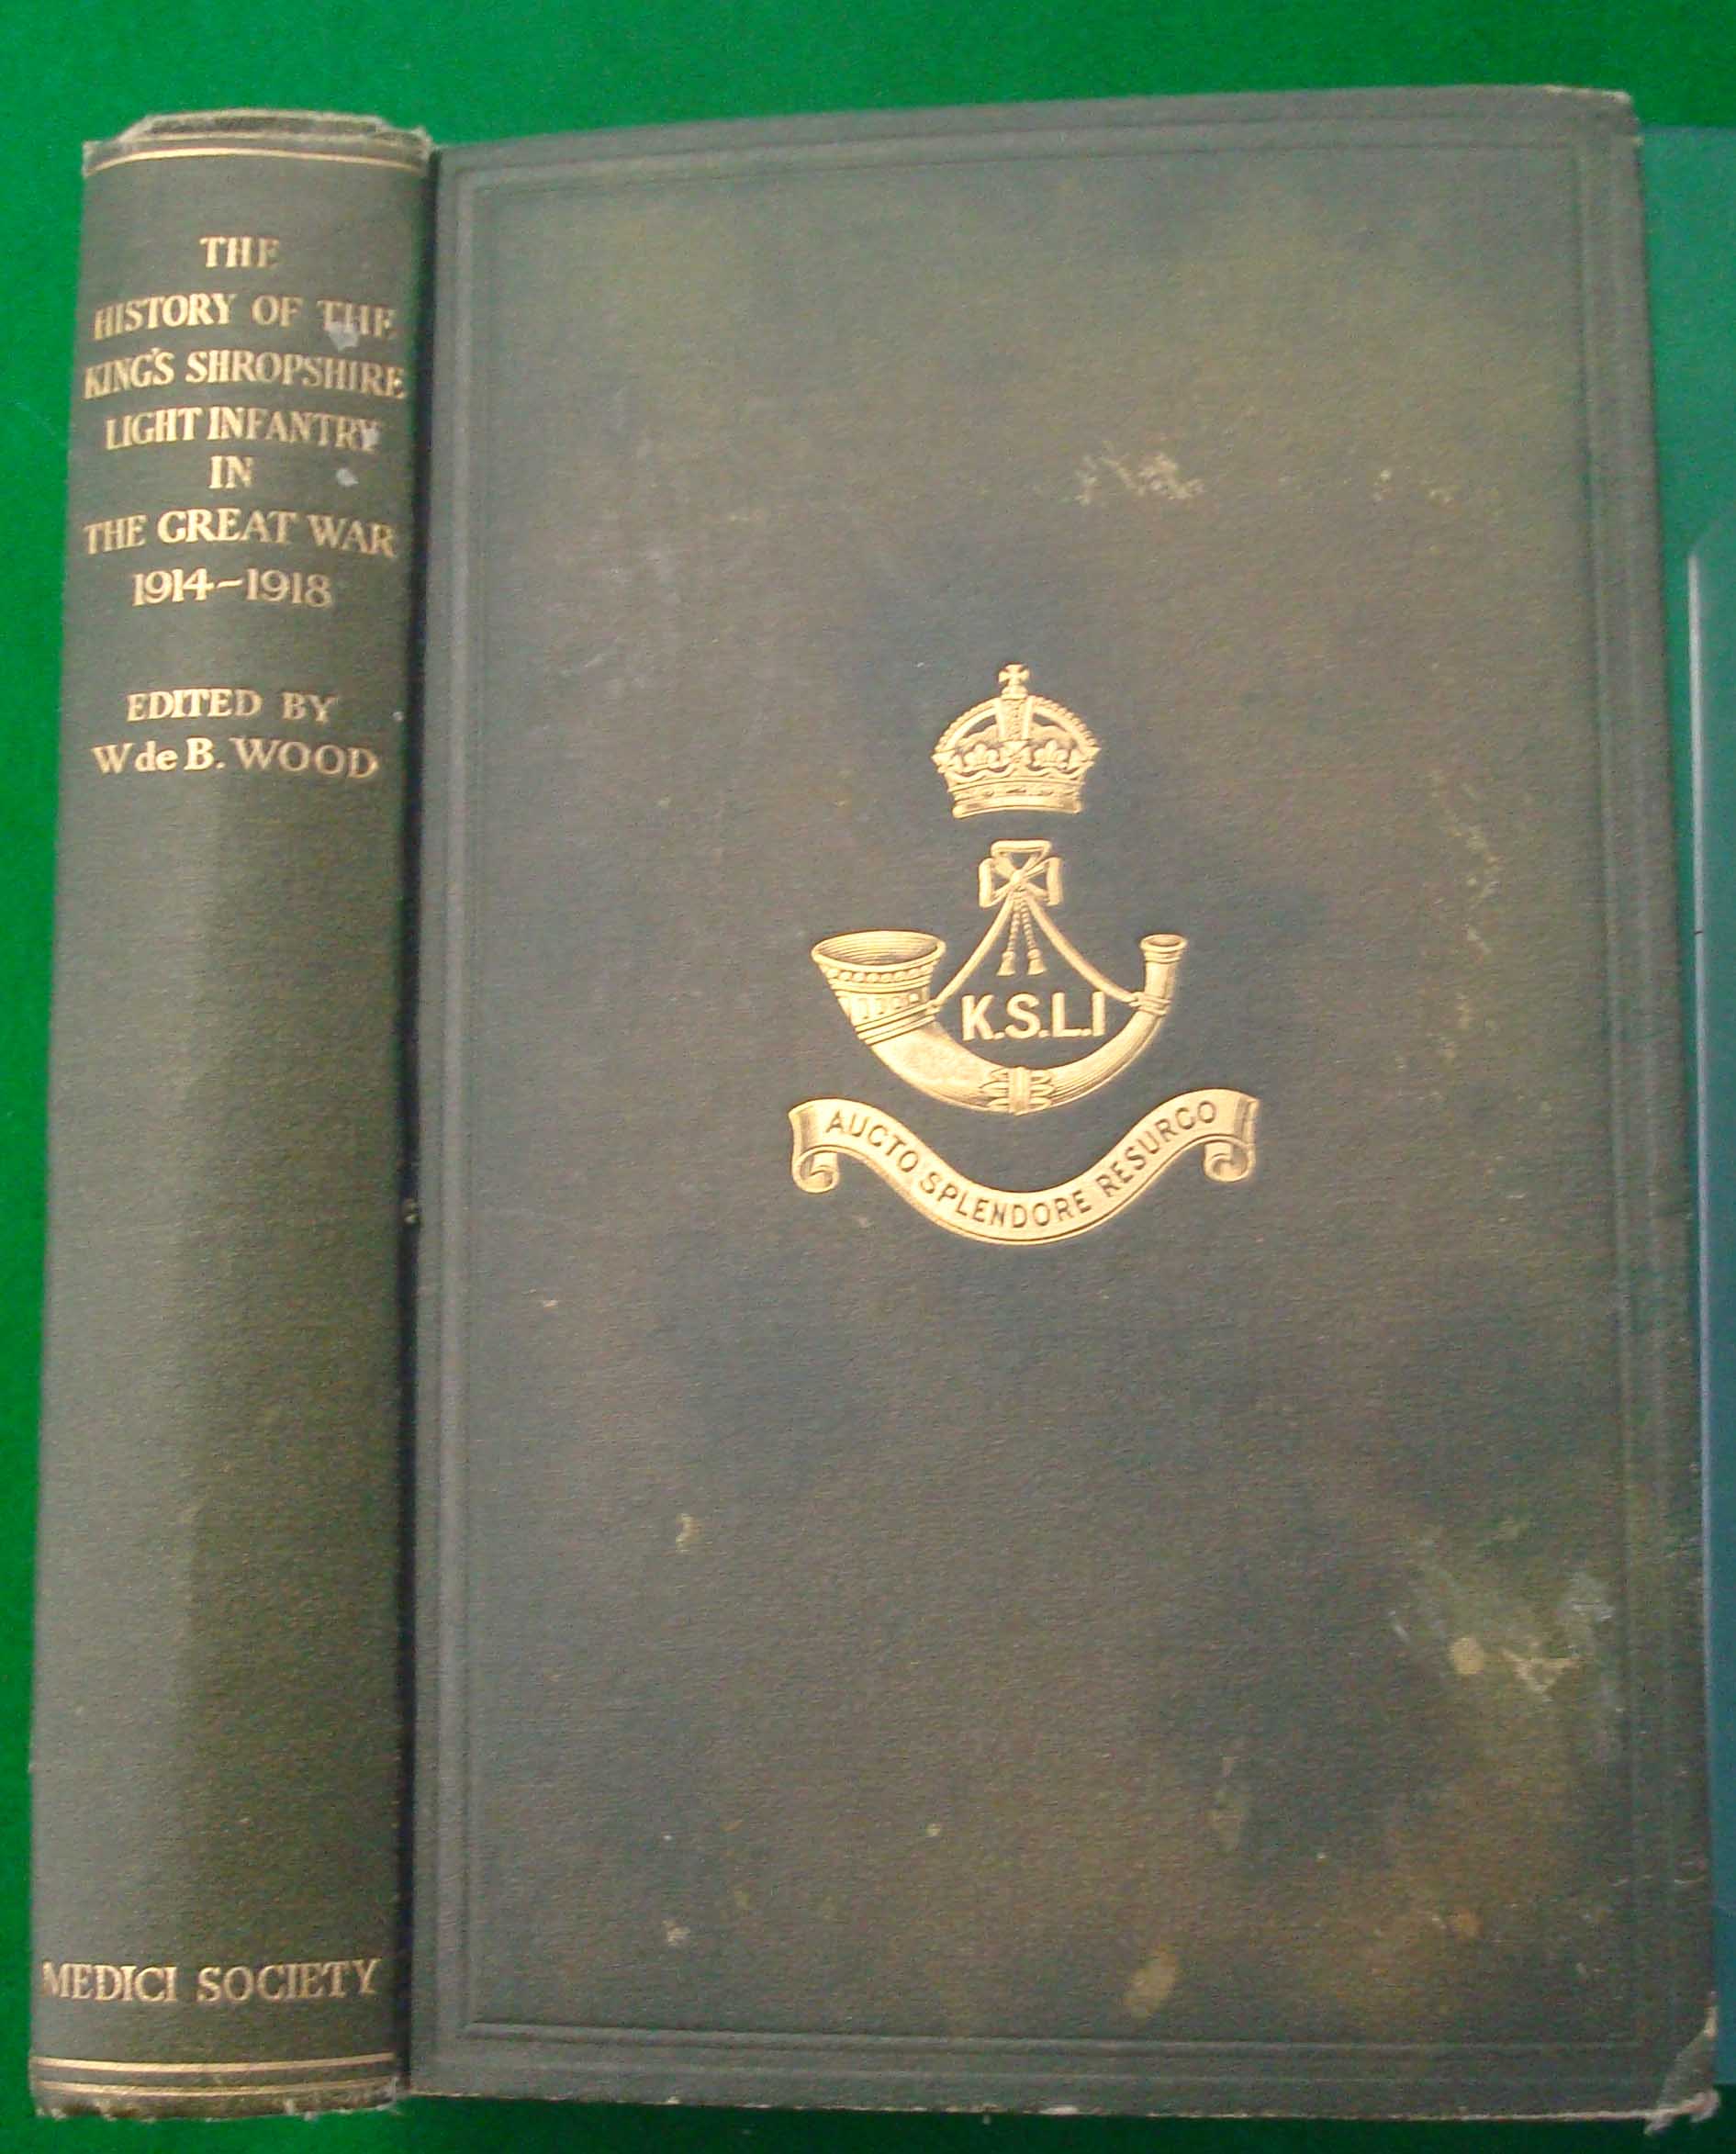 The History of the Kings Shropshire Light Infantry in the Great War 1914-1918: Printed in 1924